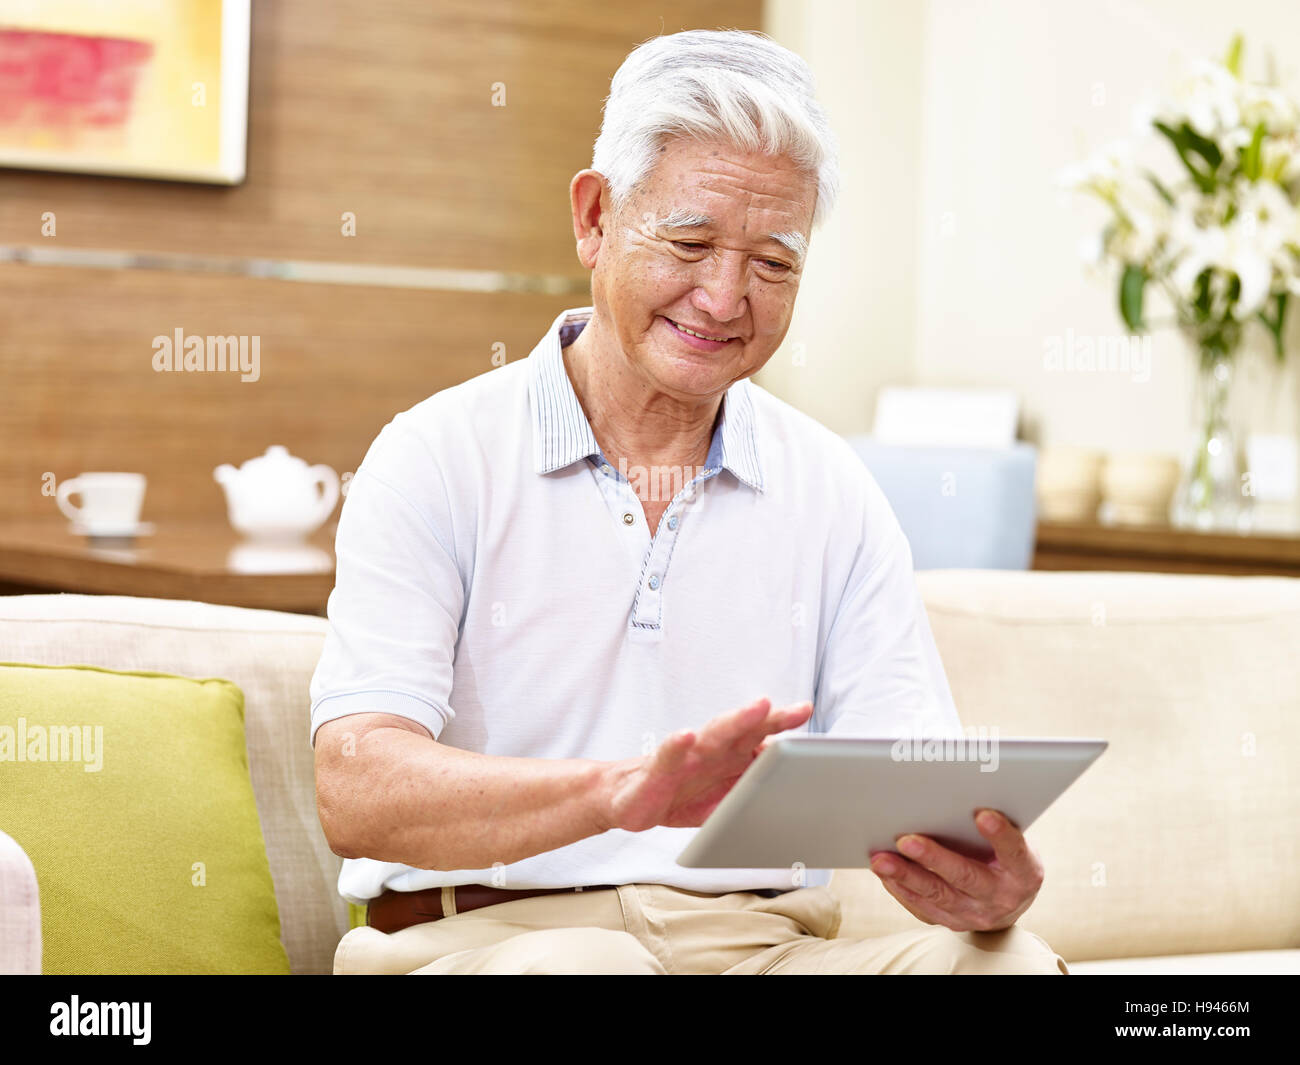 active senior asian man sitting on couch using tablet computer, relaxed, smiling Stock Photo